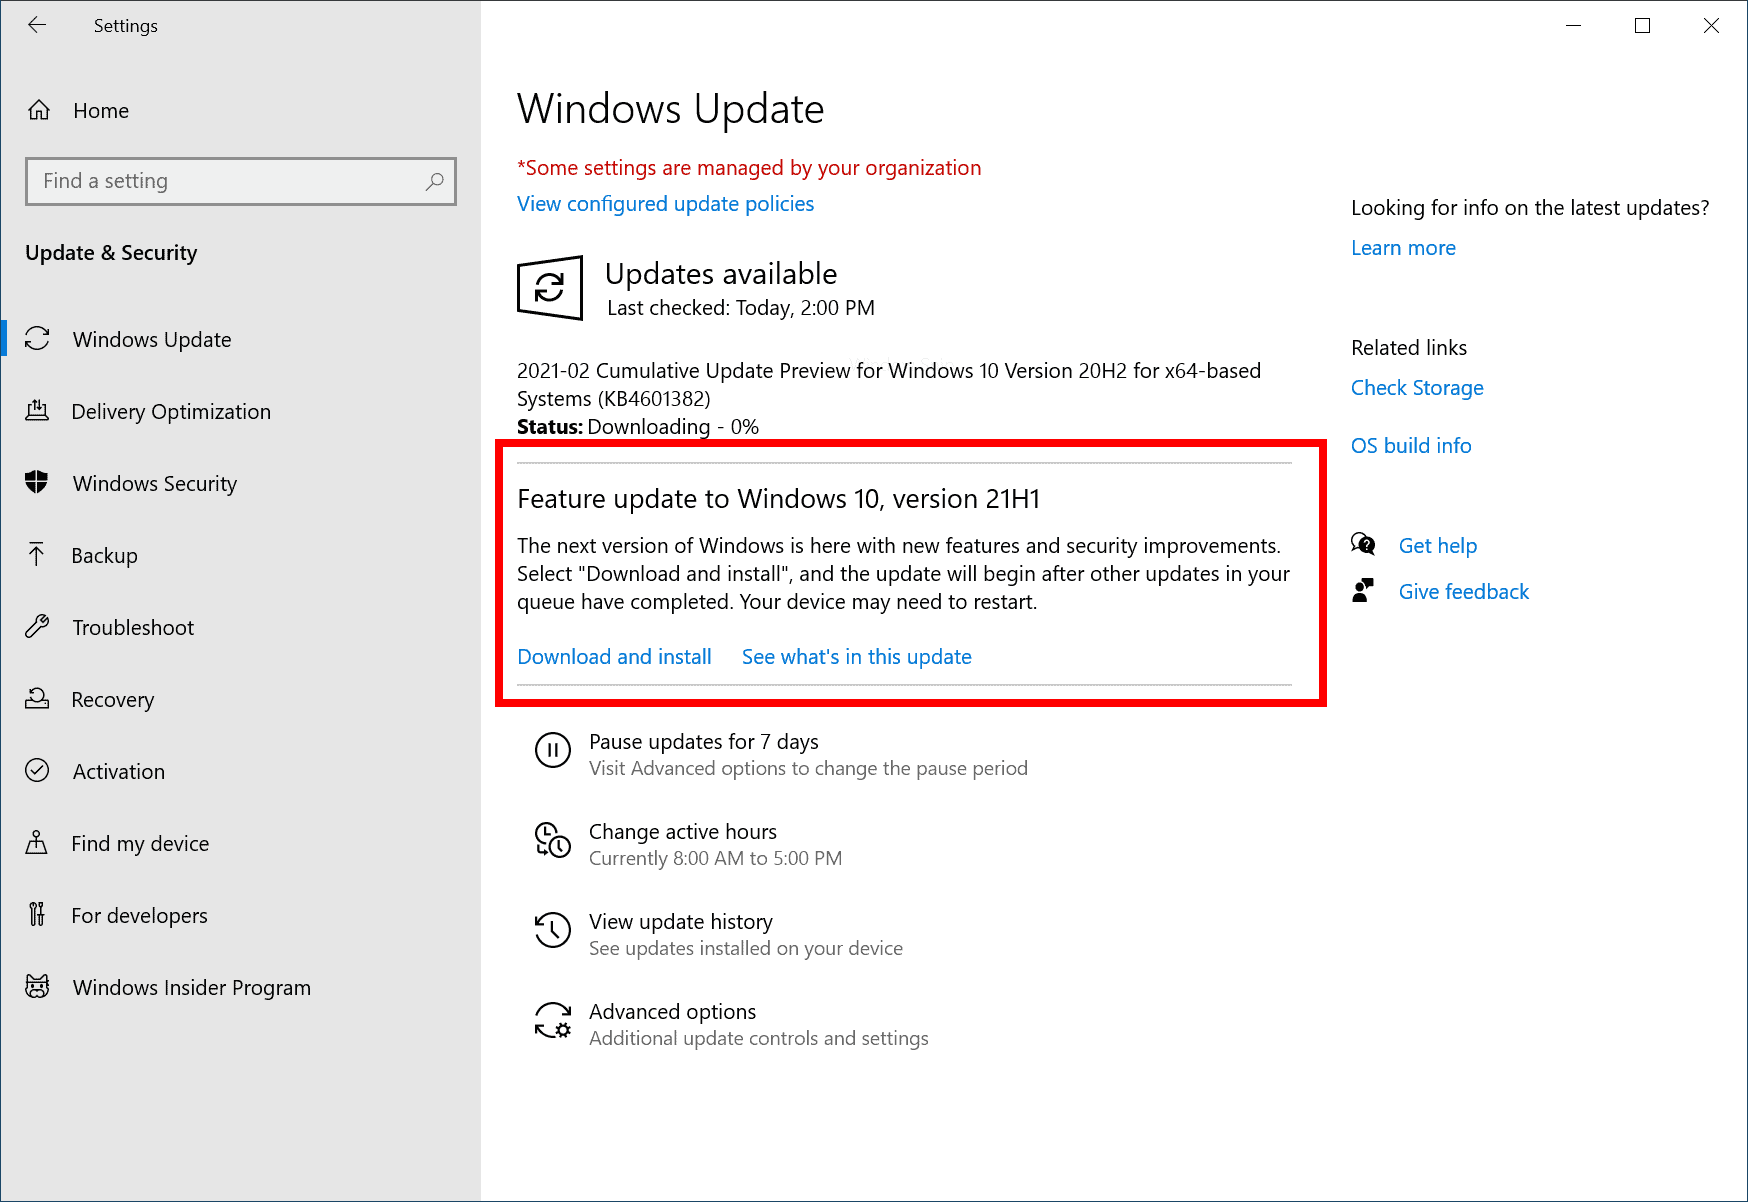 Don't get to oexcited about the features of Windows 10 version 21H1